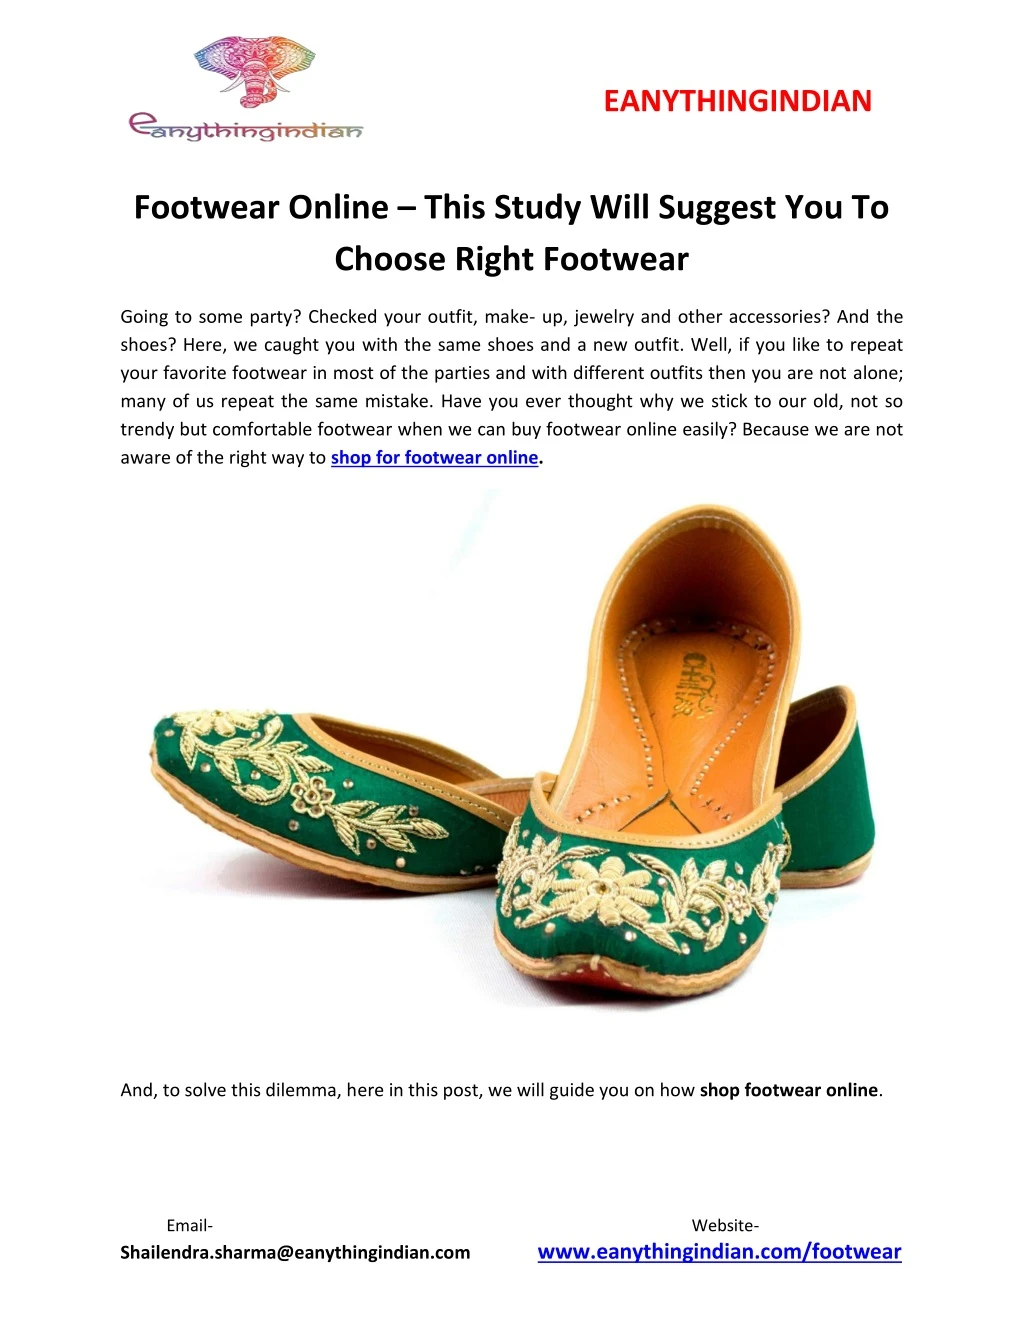 eanythingindian footwear online this study will